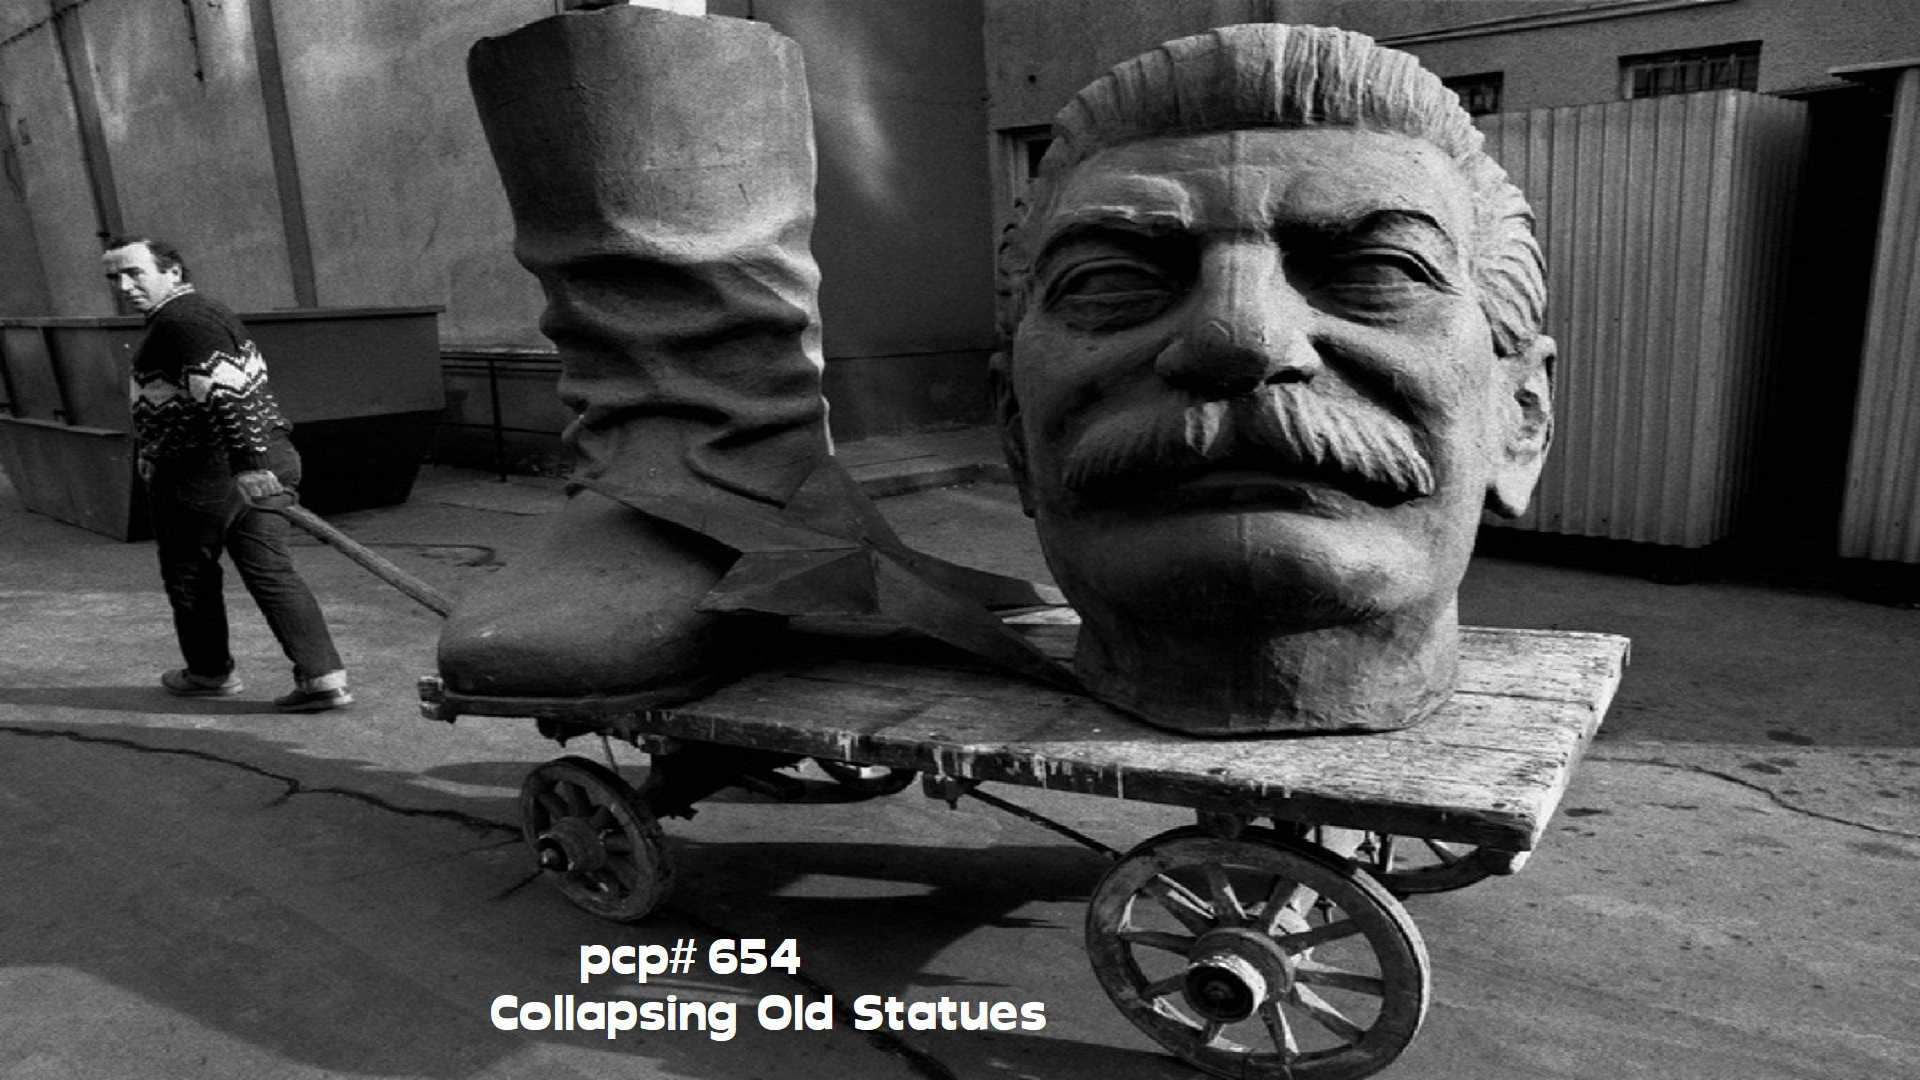 PCP#653... Collapsing Old Statues!...